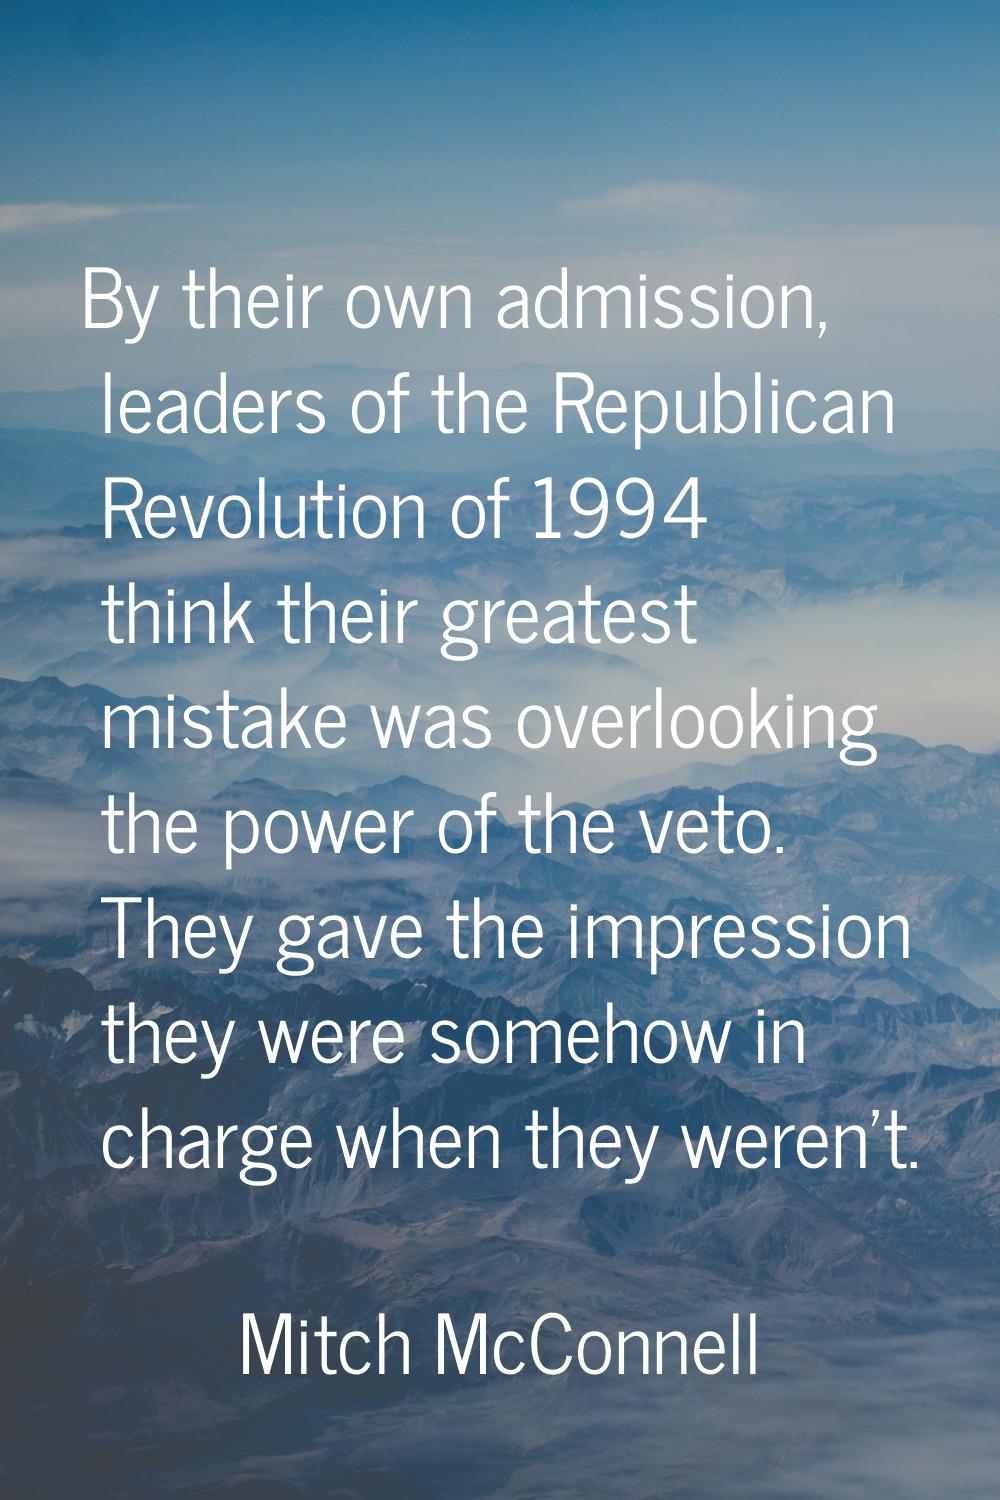 By their own admission, leaders of the Republican Revolution of 1994 think their greatest mistake w